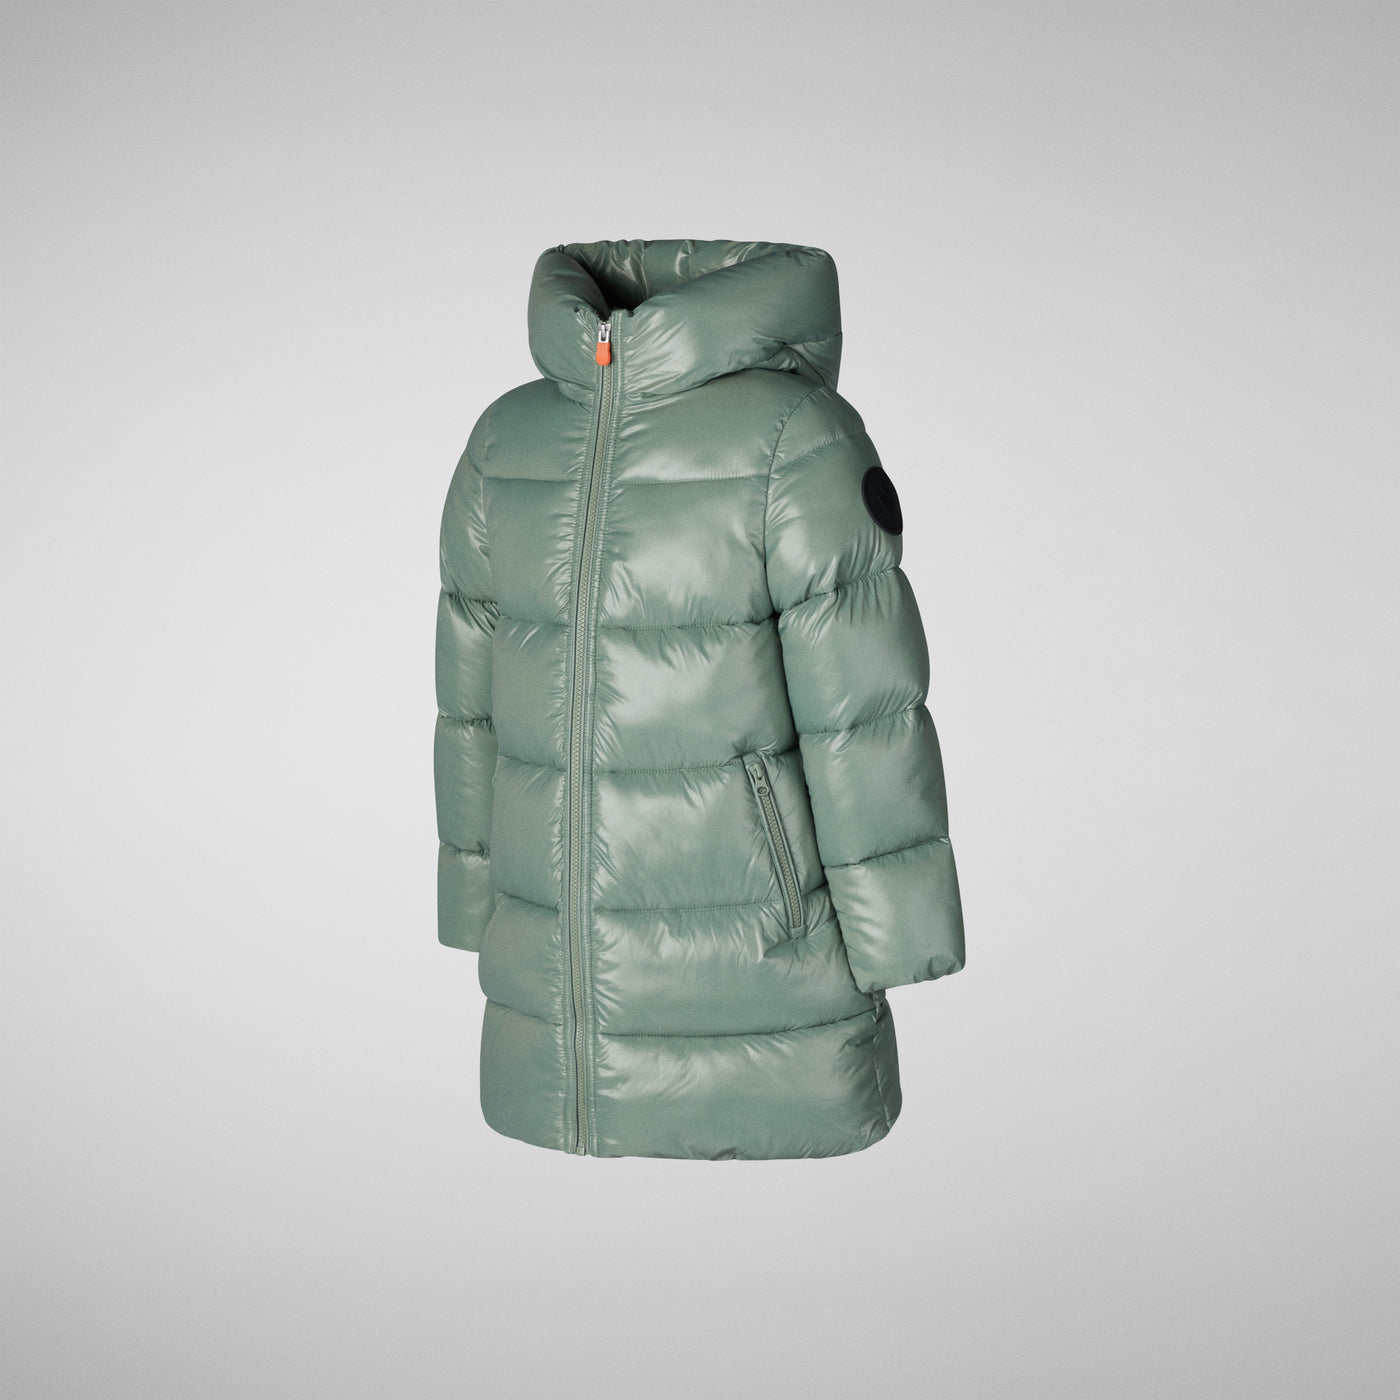 Product Side View of Girls' Chase Faux Fur Lined Hooded Puffer Coat in Seaweed Green